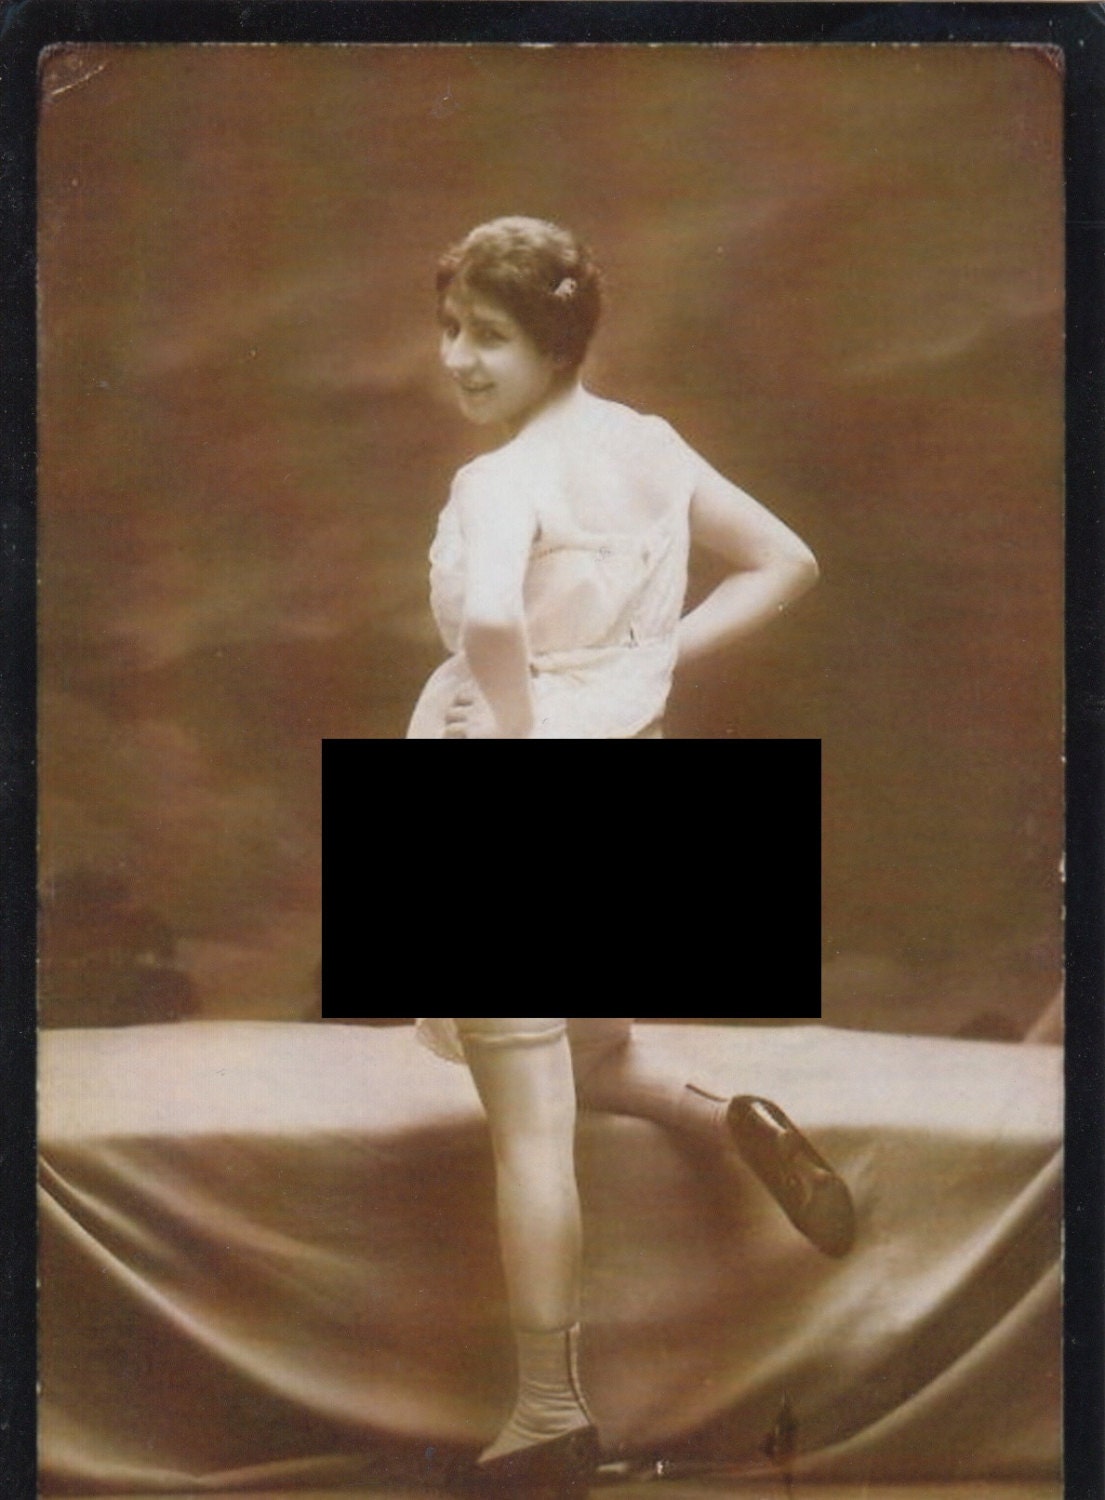 Reproduction Photo of a Vintage 1920s Erotic Postcard .